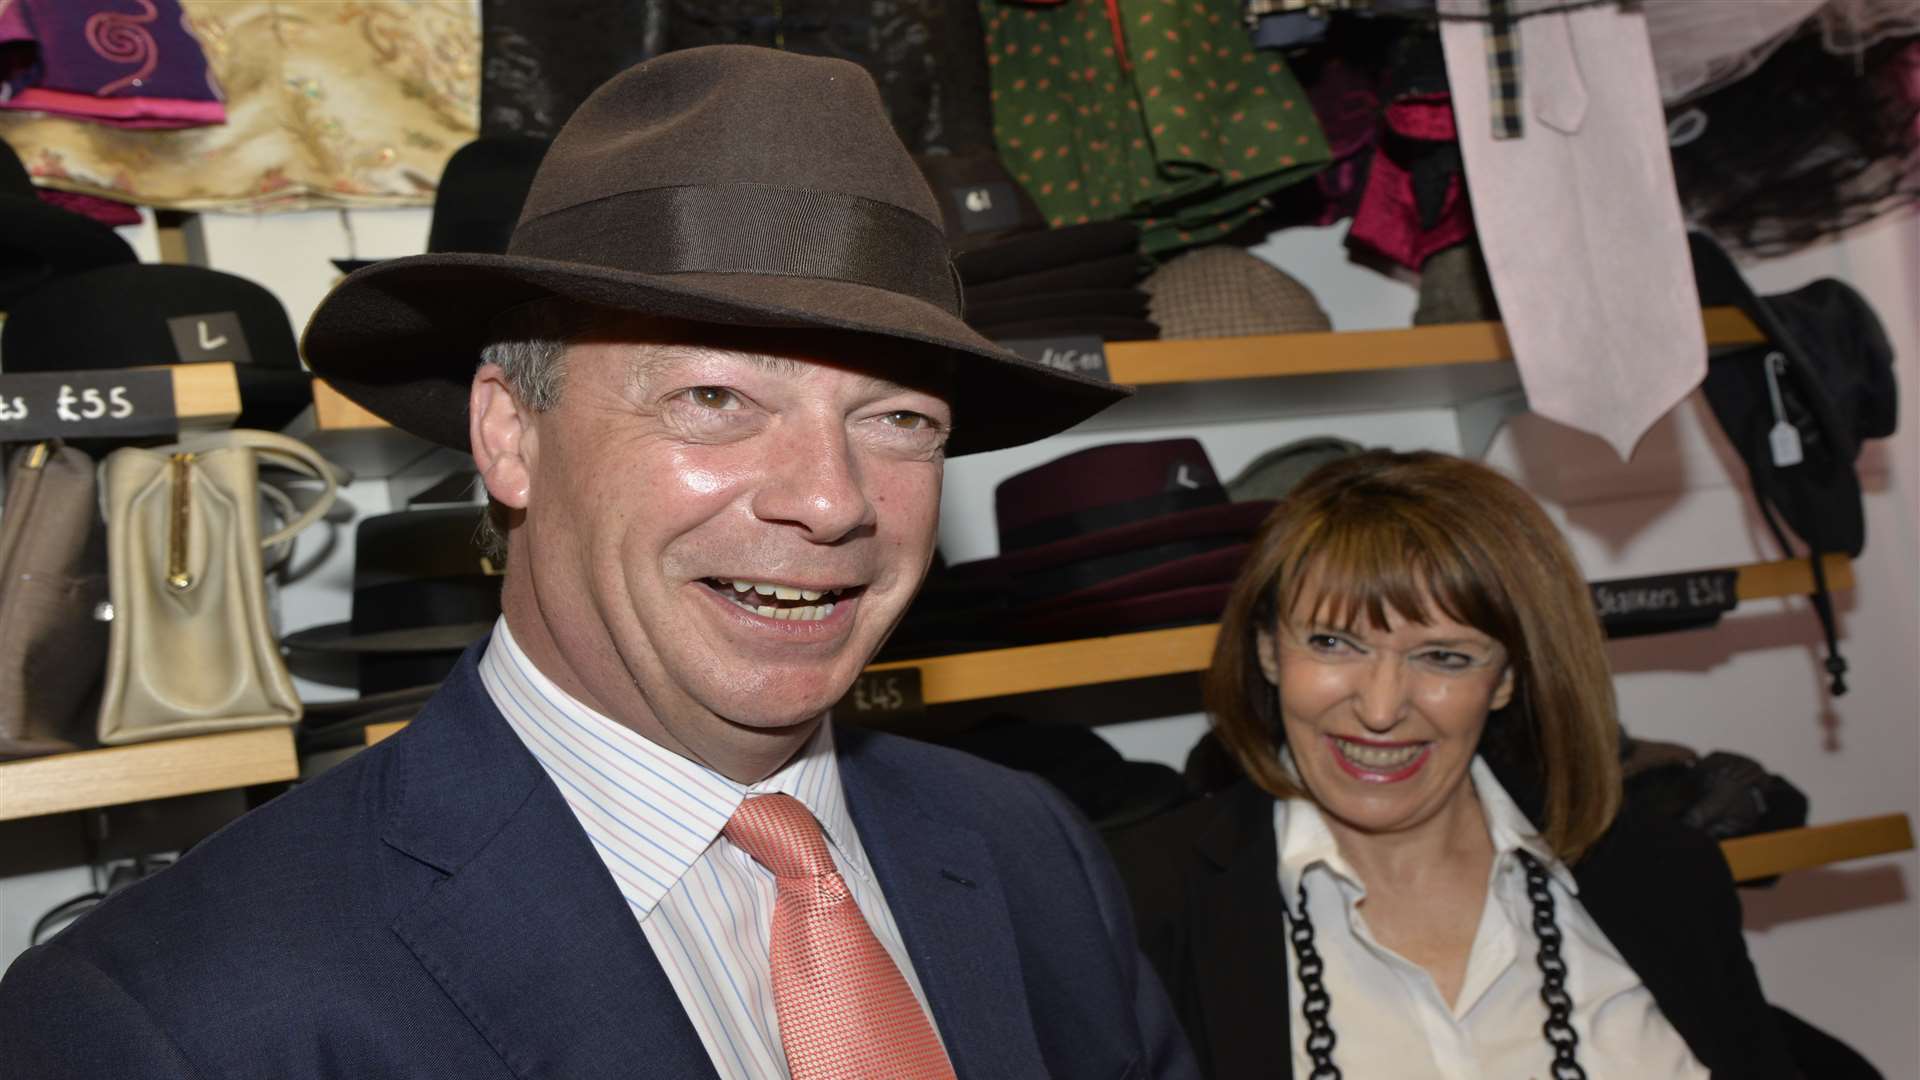 Mr Farage spent two hours in a shop during a campaign visit